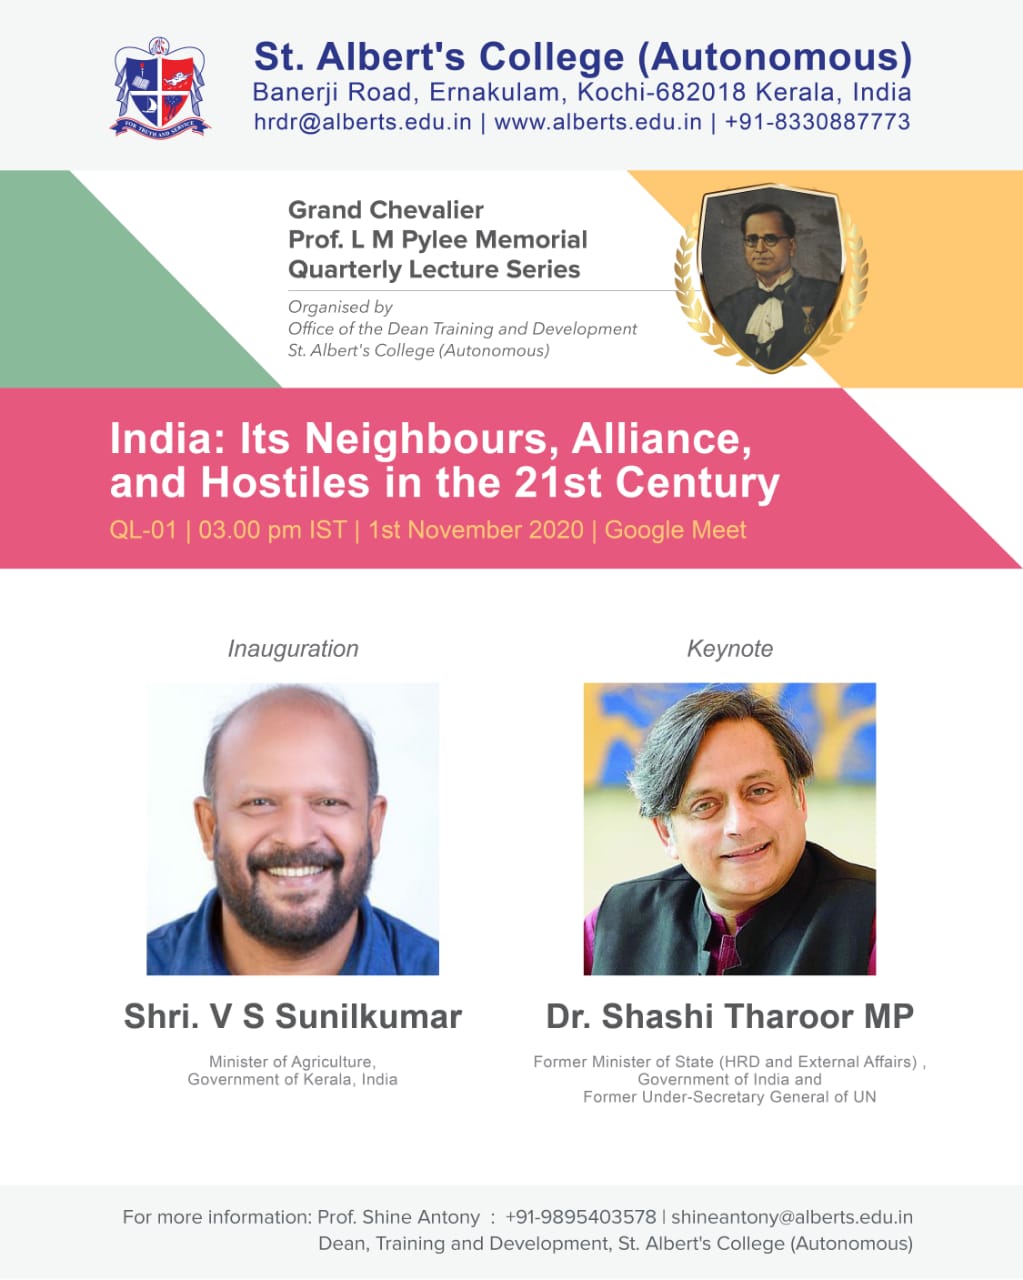 Grand Chevalier Ptof L M Pylee Memorial Quarterly Lecture Series – India: Its neighbours, alliance, and Hostiles in the 21st century